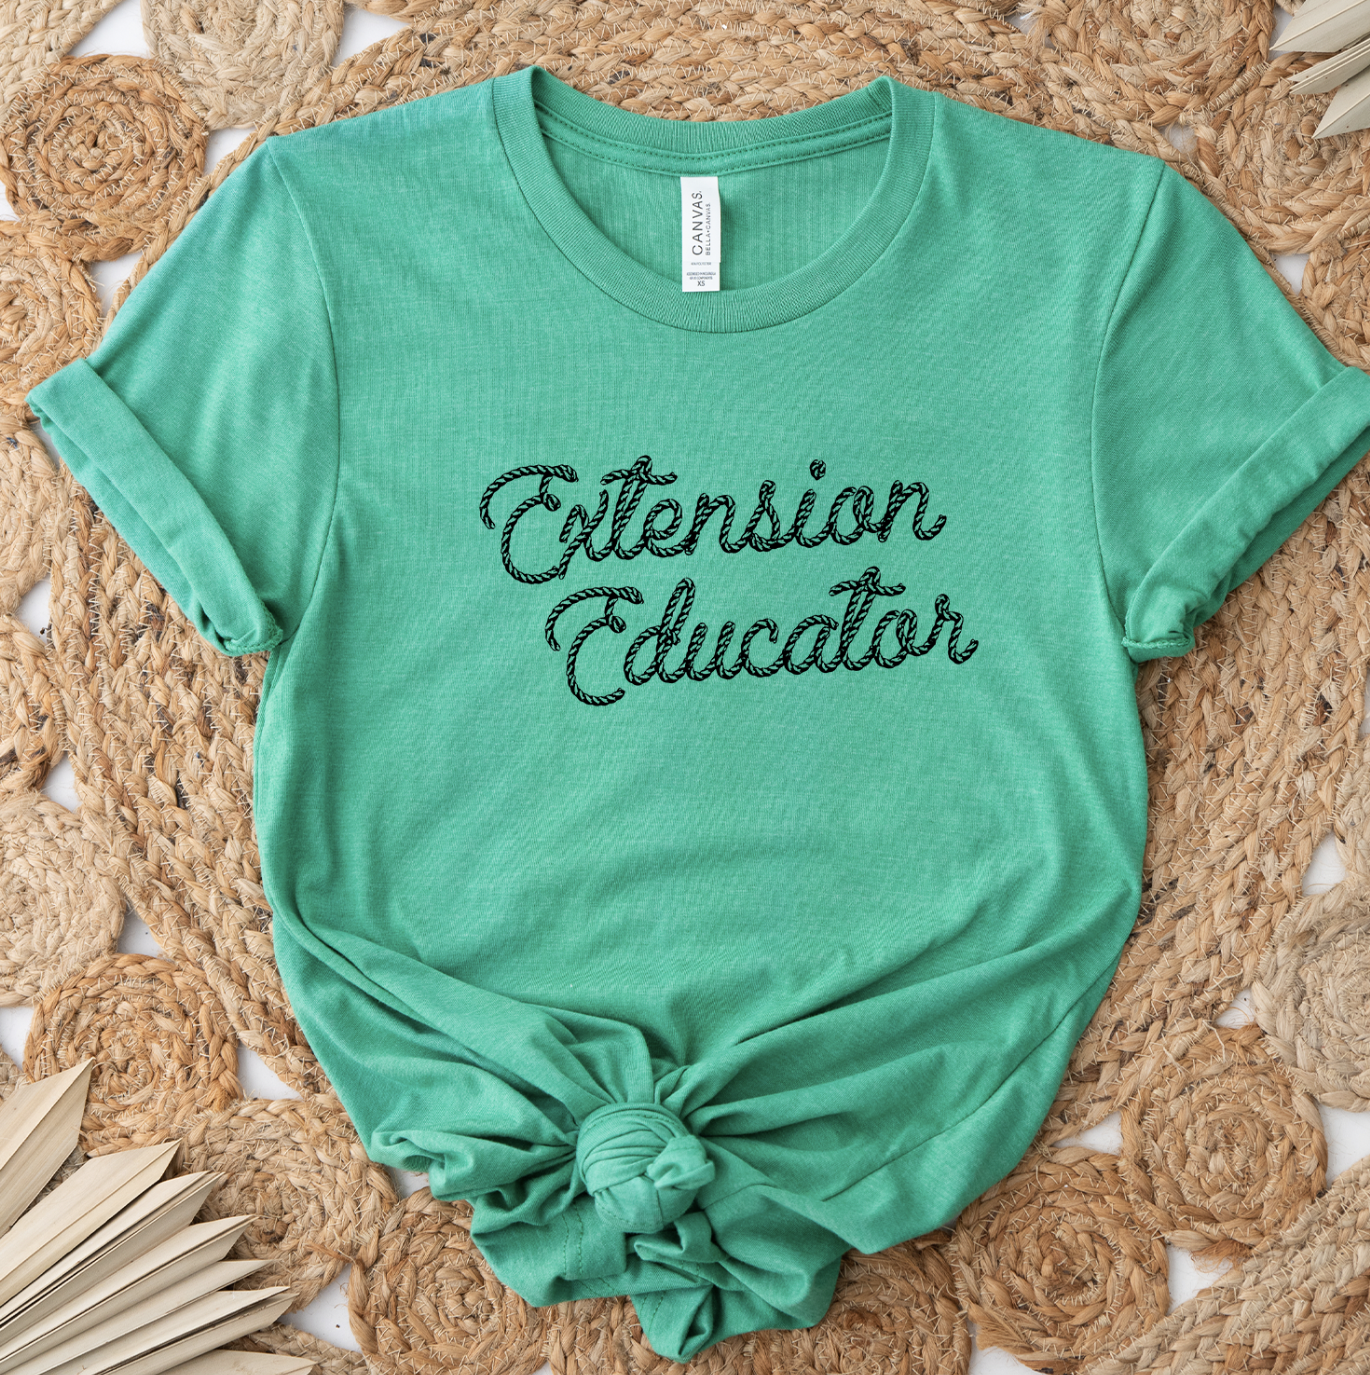 Rope Extension Educator T-Shirt (XS-4XL) - Multiple Colors!